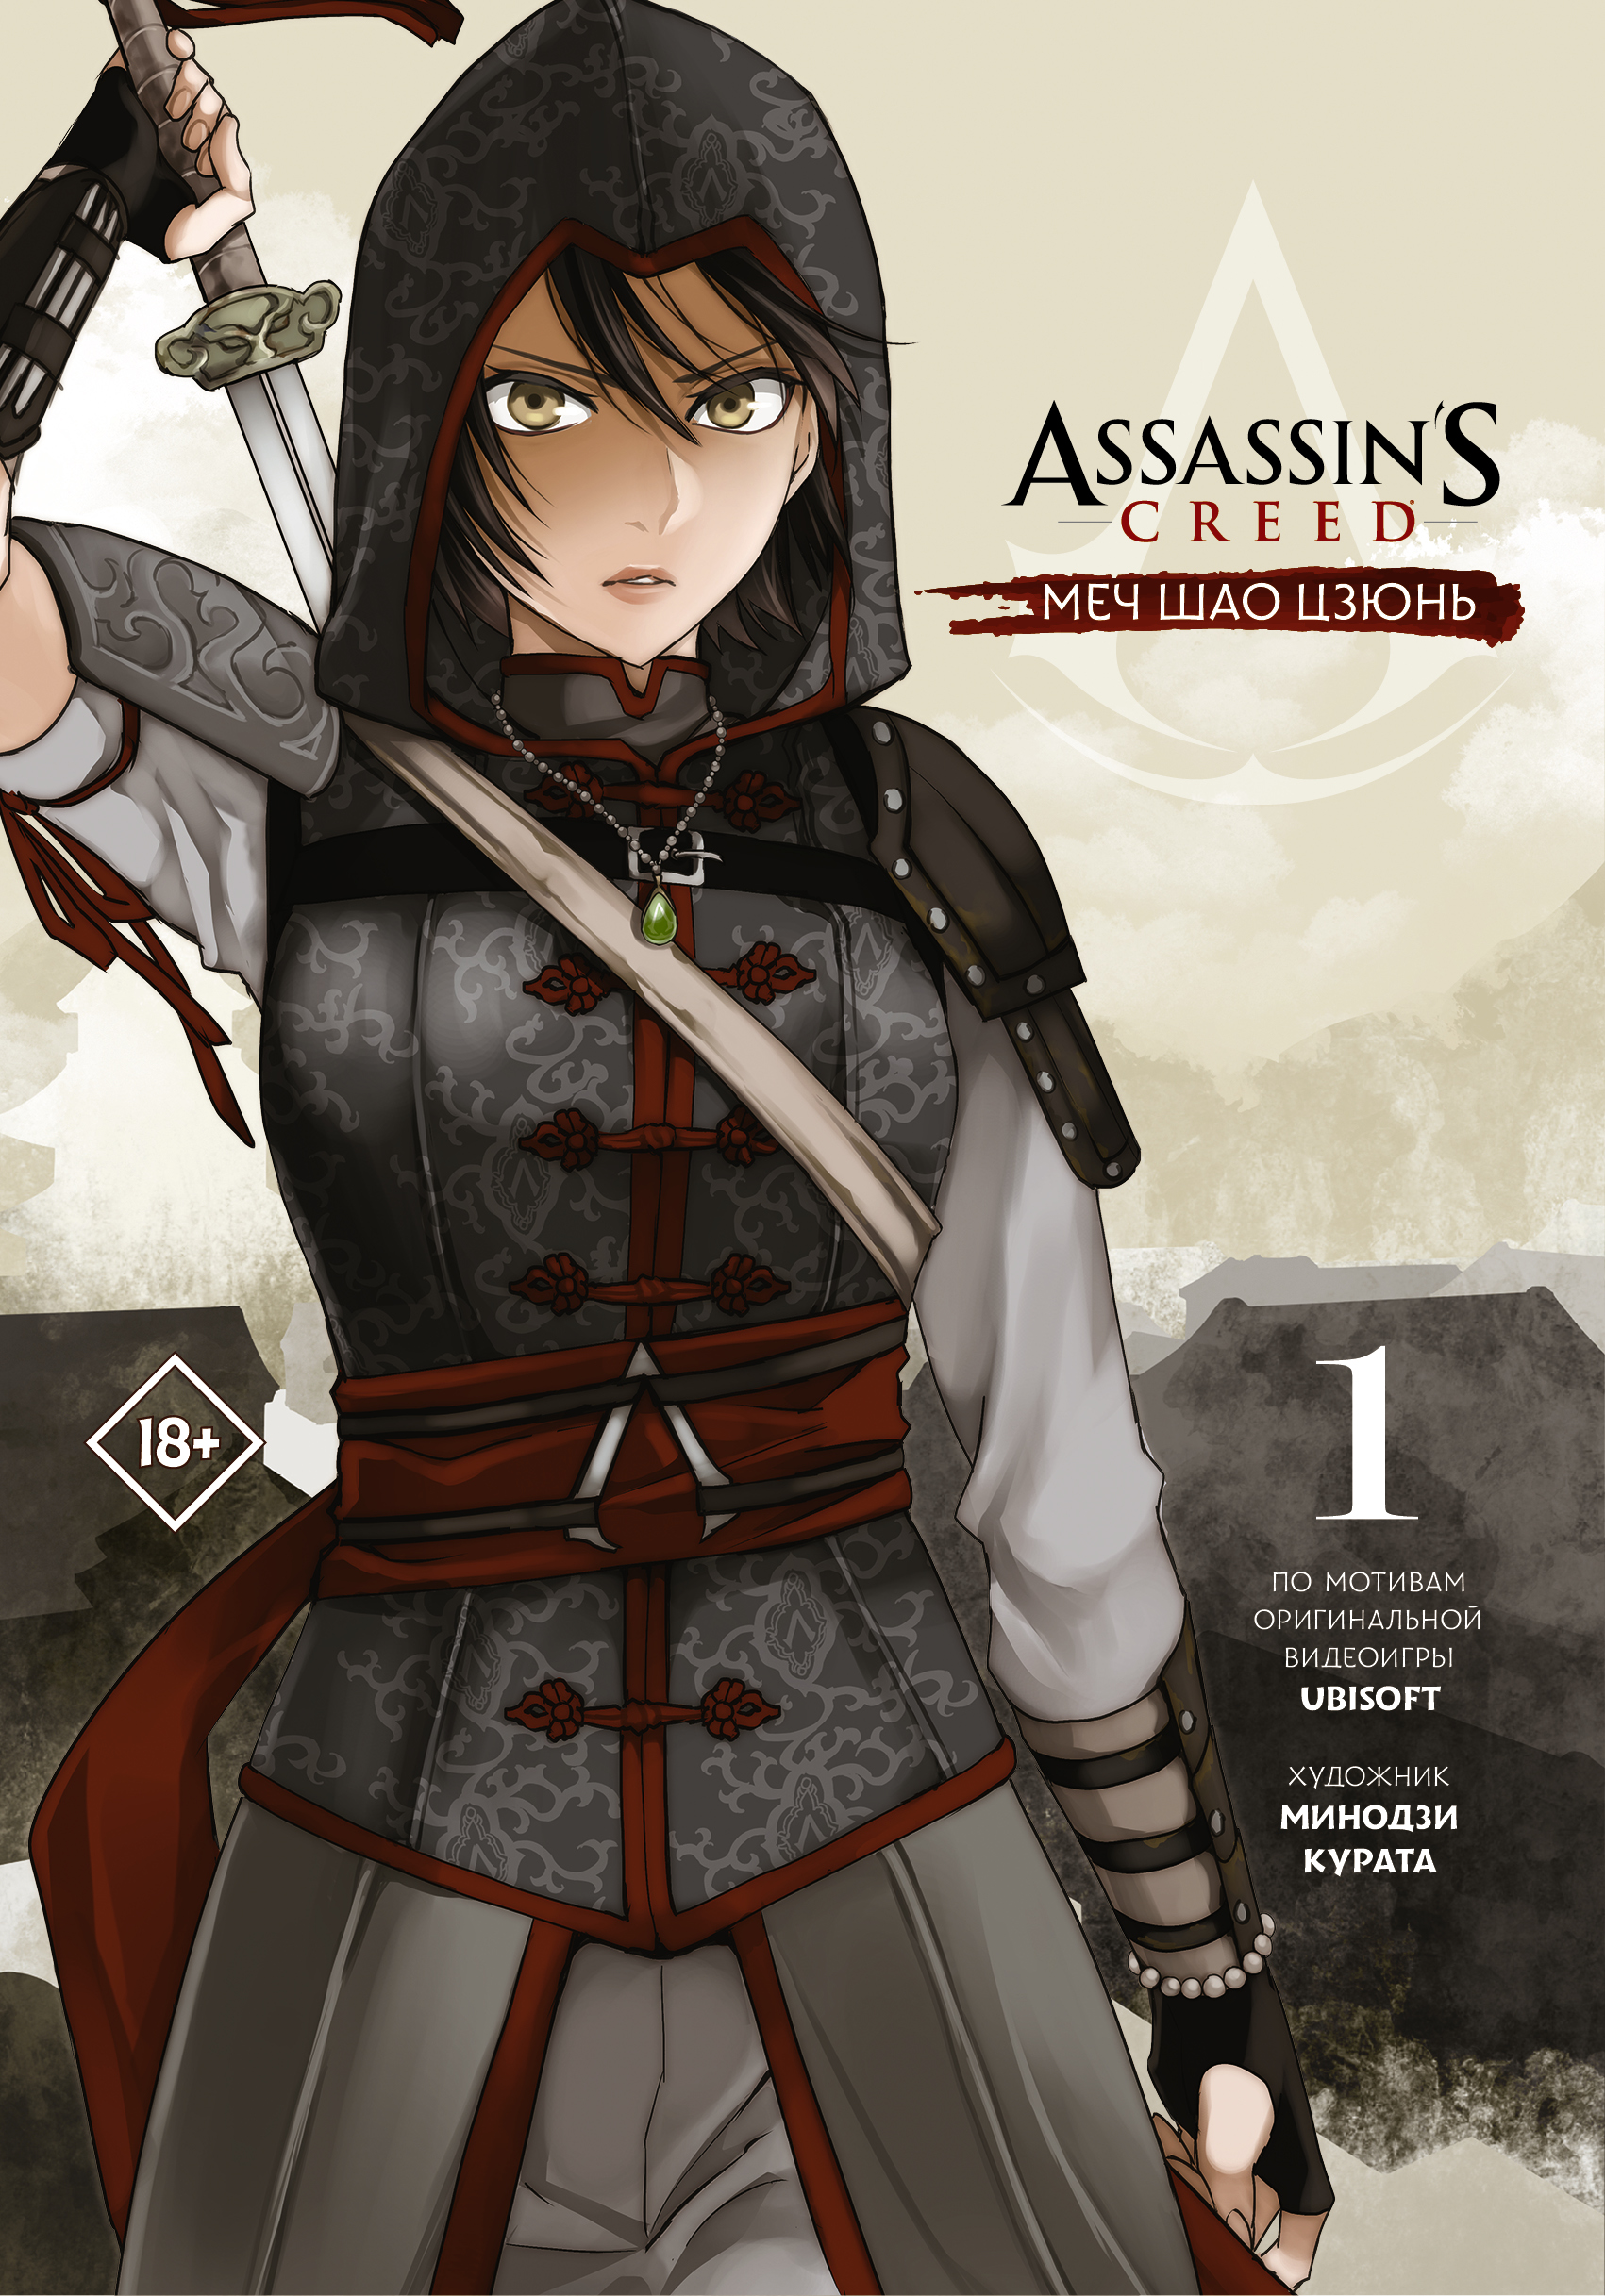   Assassin's Creed:    